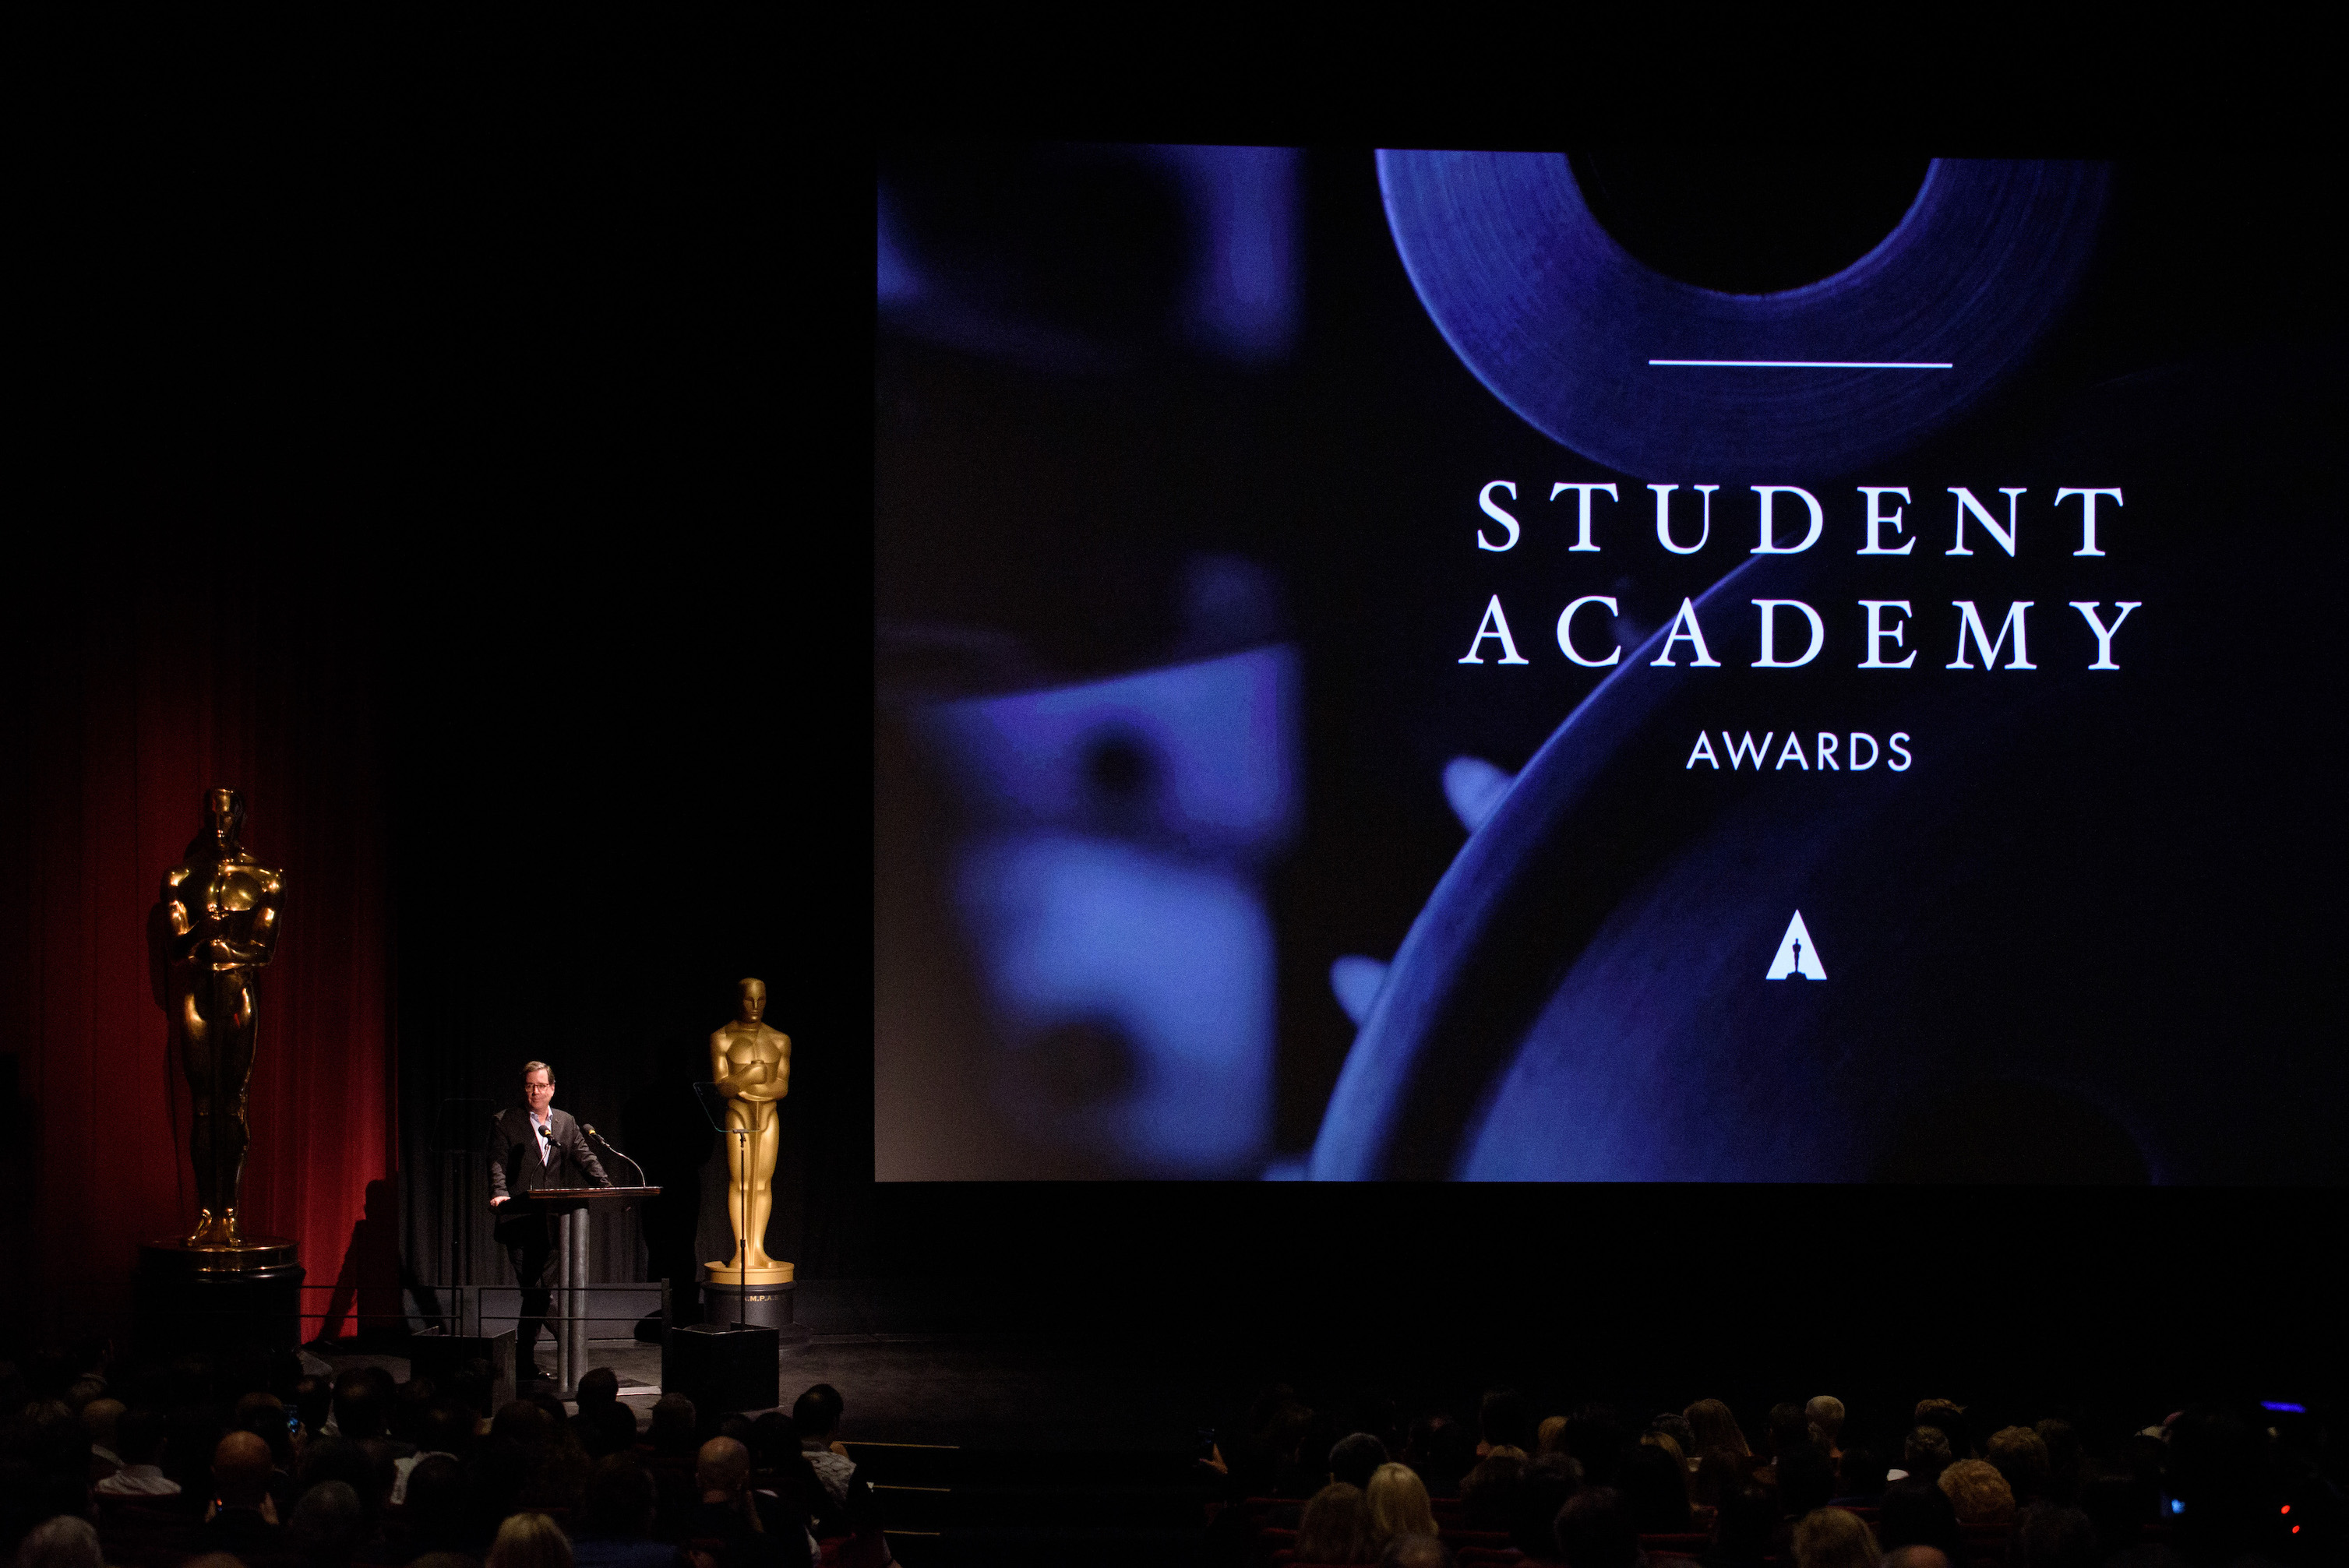 Congratulations to AFI’s Student Academy Award Winners American Film